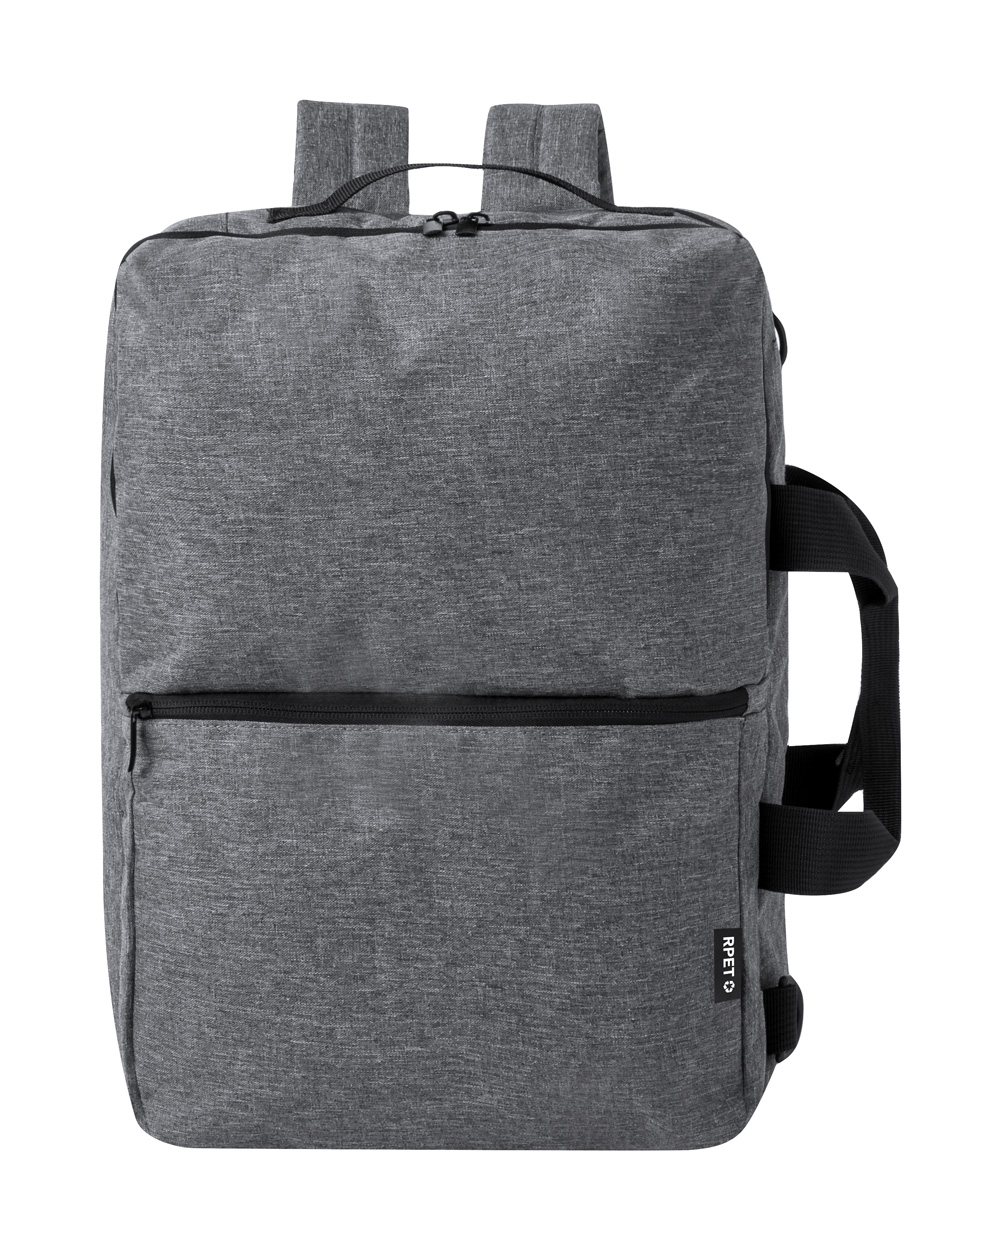 Makarzur RPET backpack for documents - grey